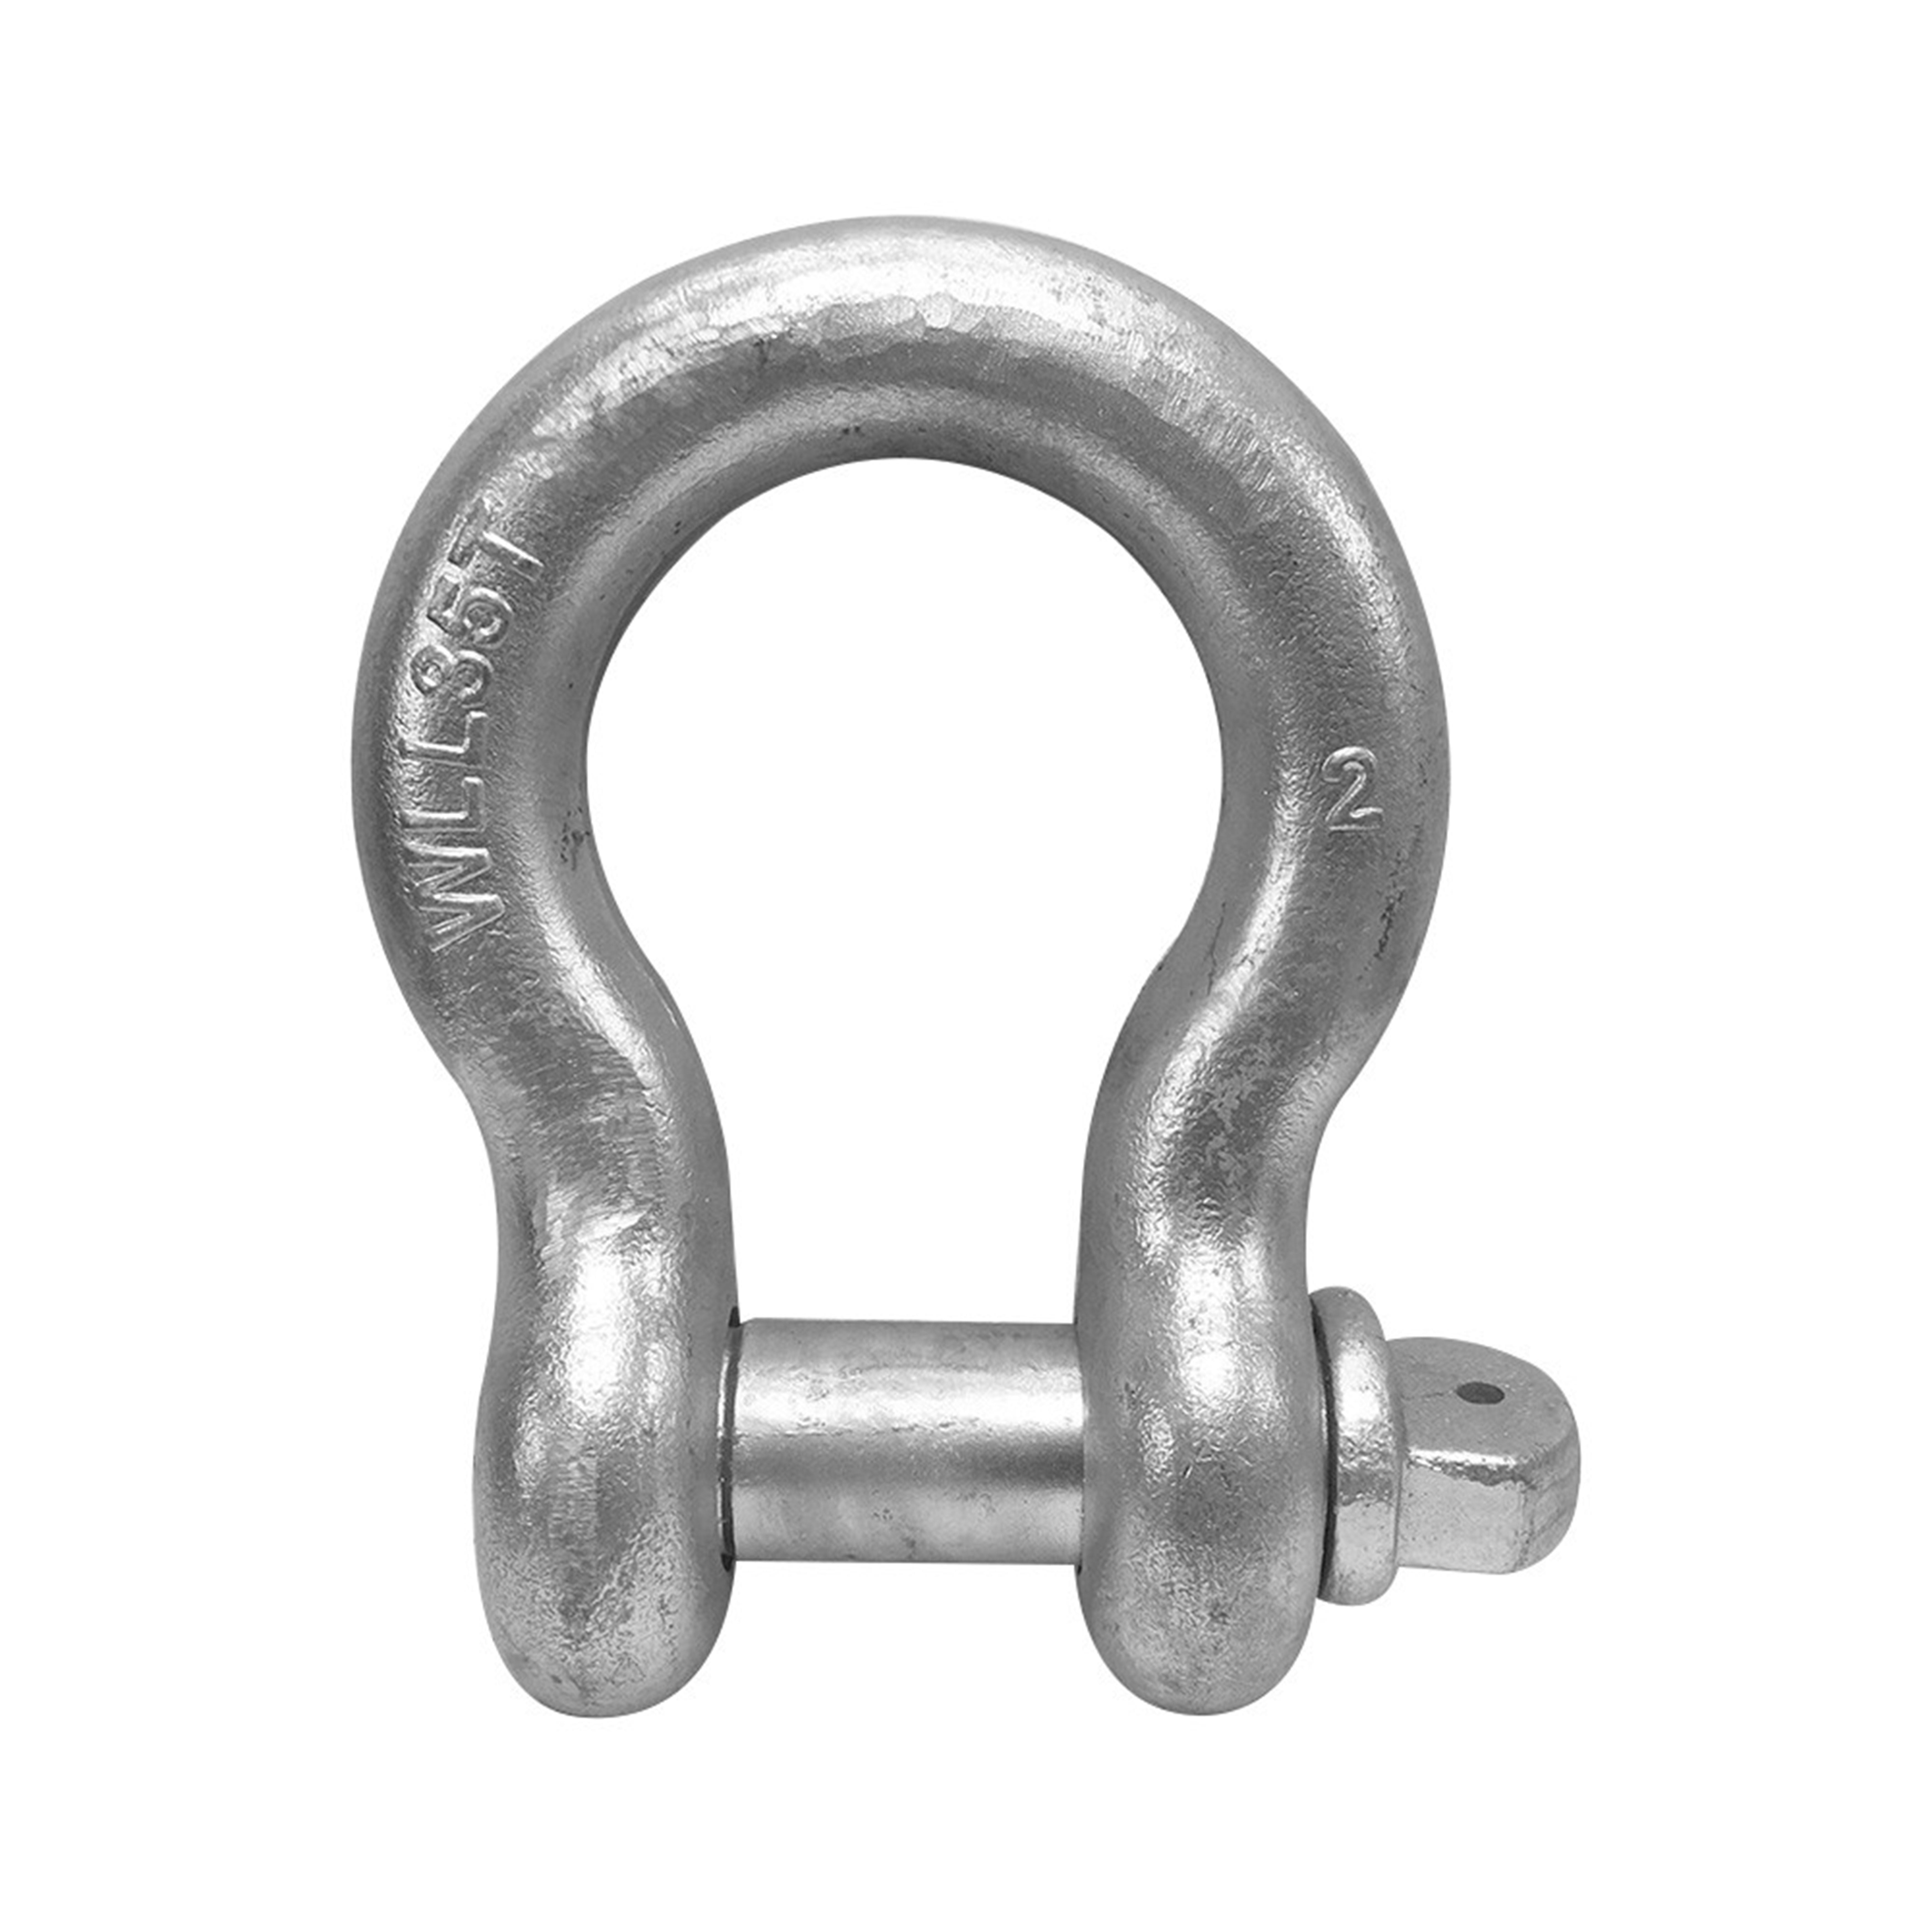 2 Pcs 3/8" inch Galvanized Steel Silver D Ring Bow Shackle with Screw Pin 